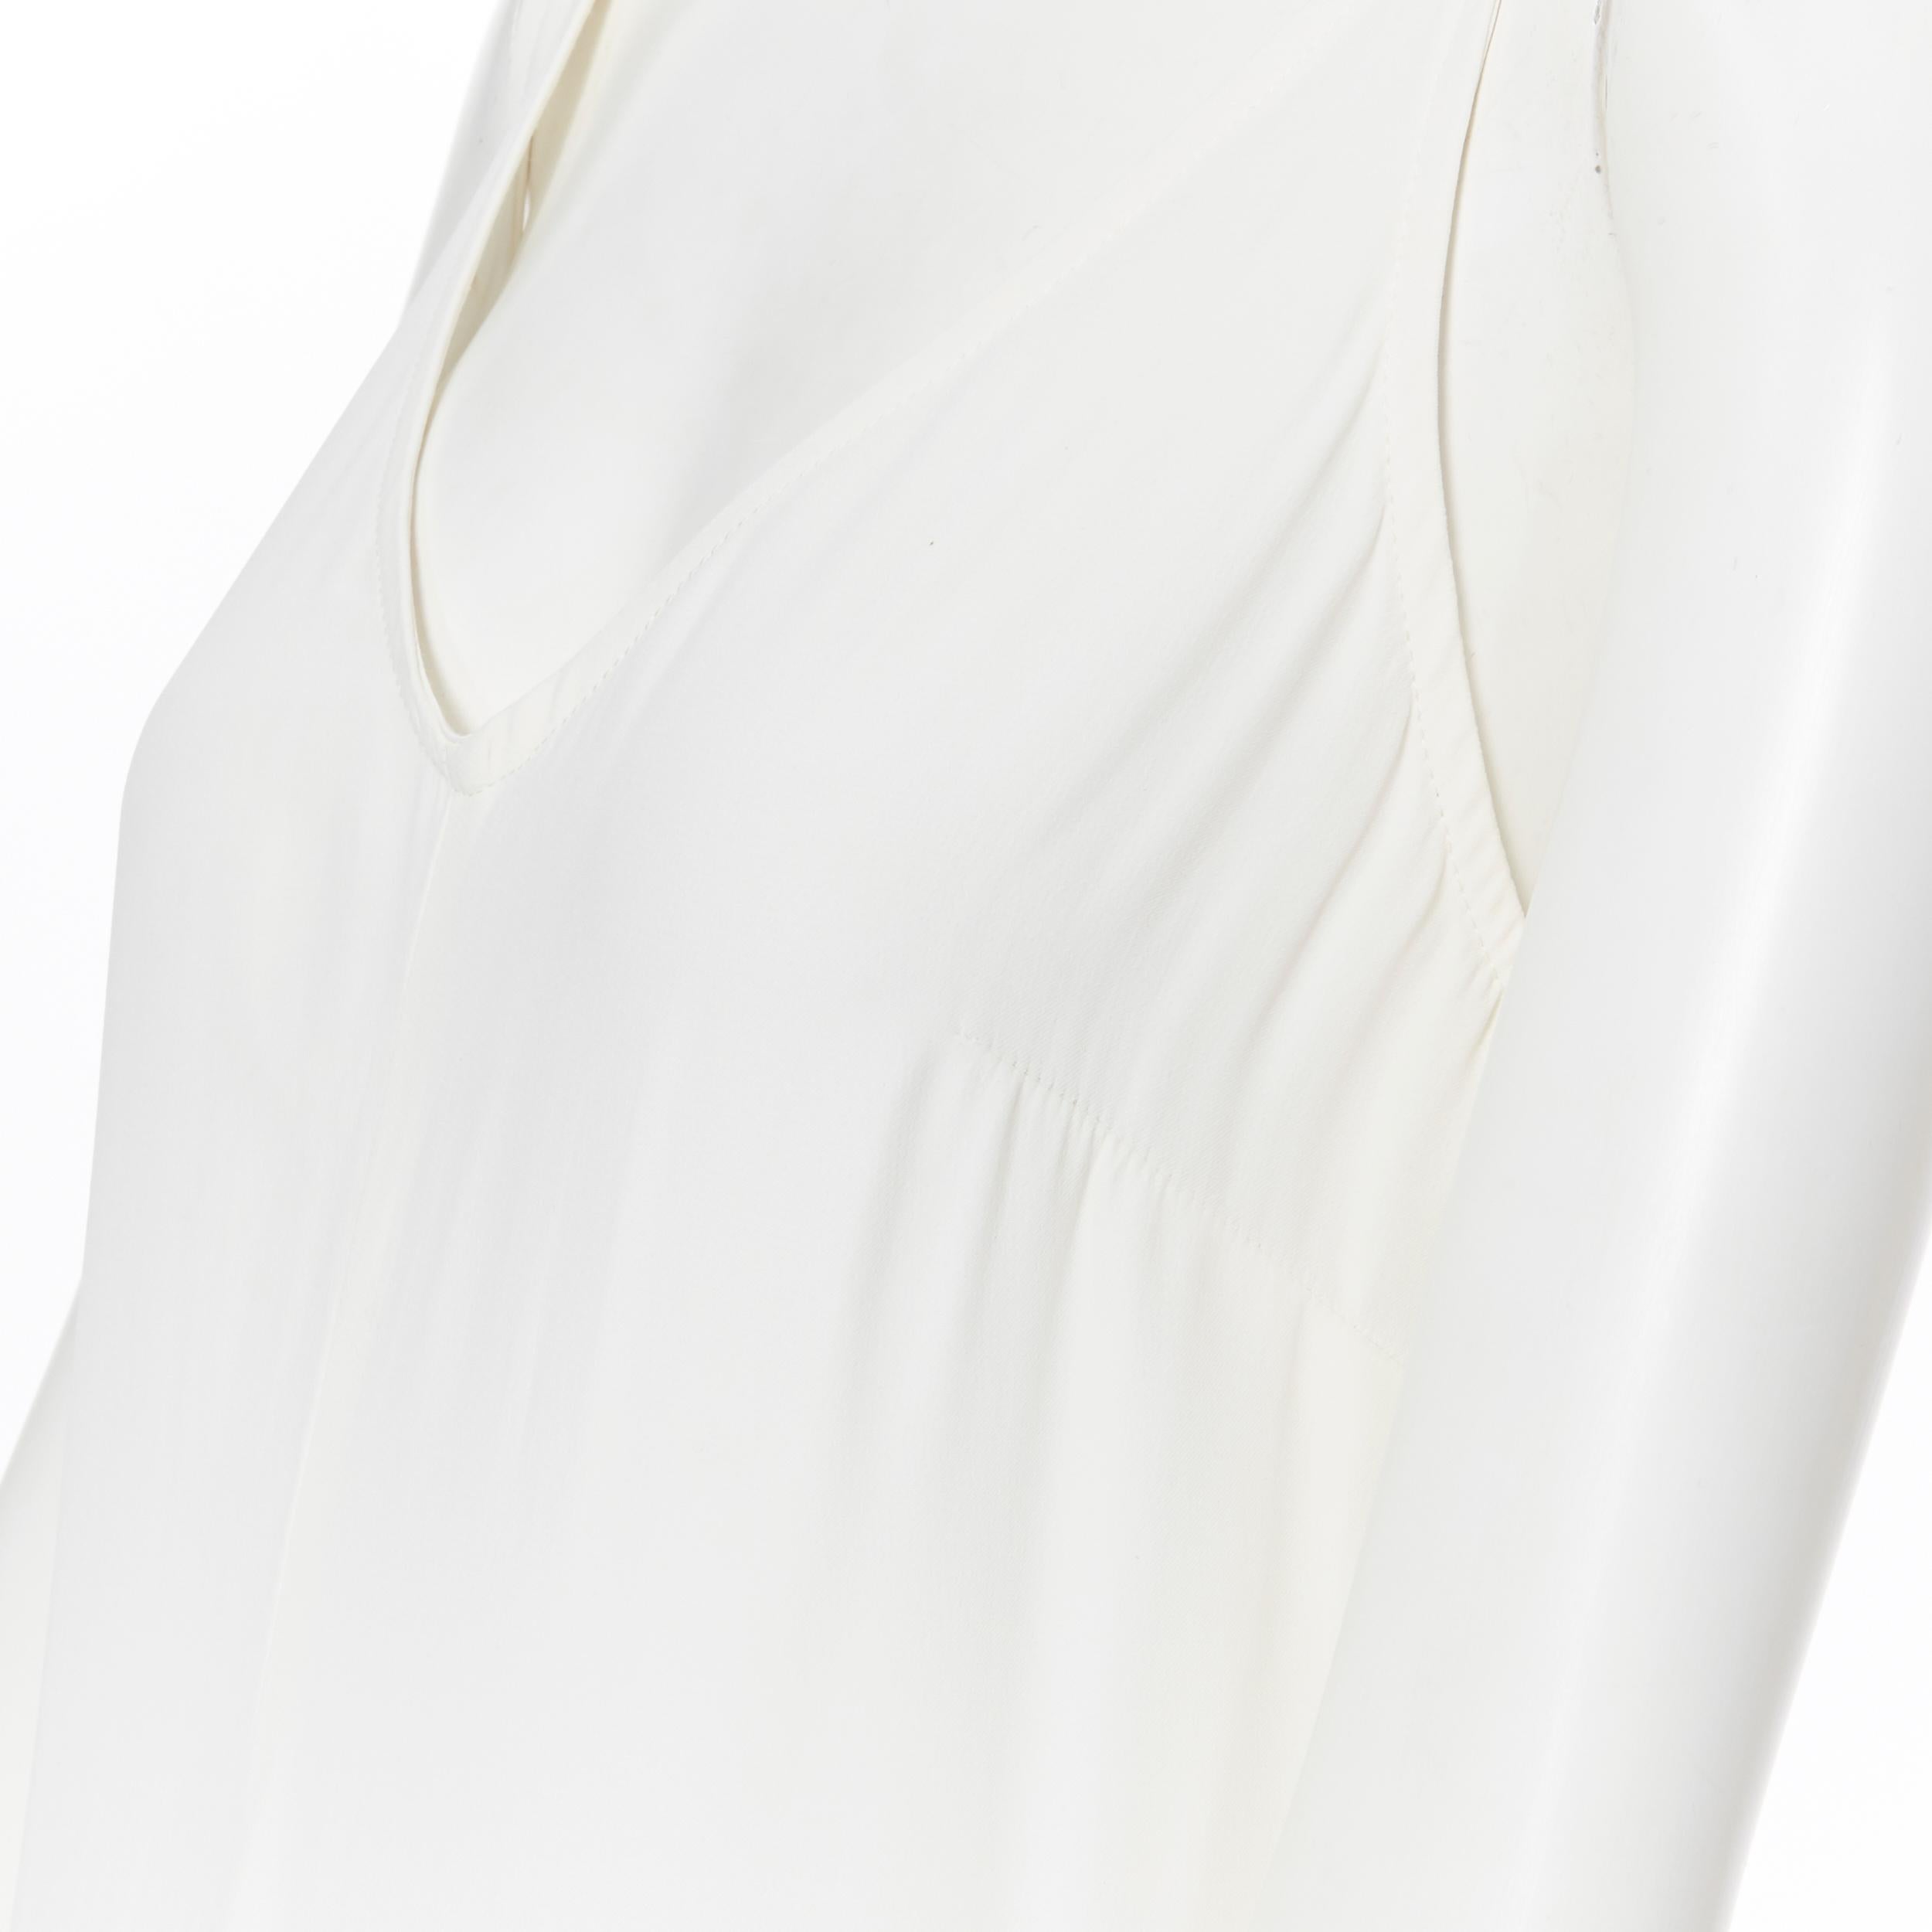 STAUD 100% viscose white V-beck dipped nback casual maxi dress XS
Brand: Staud
Model Name / Style: Maxi dress
Material: Viscose
Color: White
Pattern: Solid
Extra Detail: Bust darts Sleeveless. V-neck neckline. Wide Strap strap type.
Made in: Los